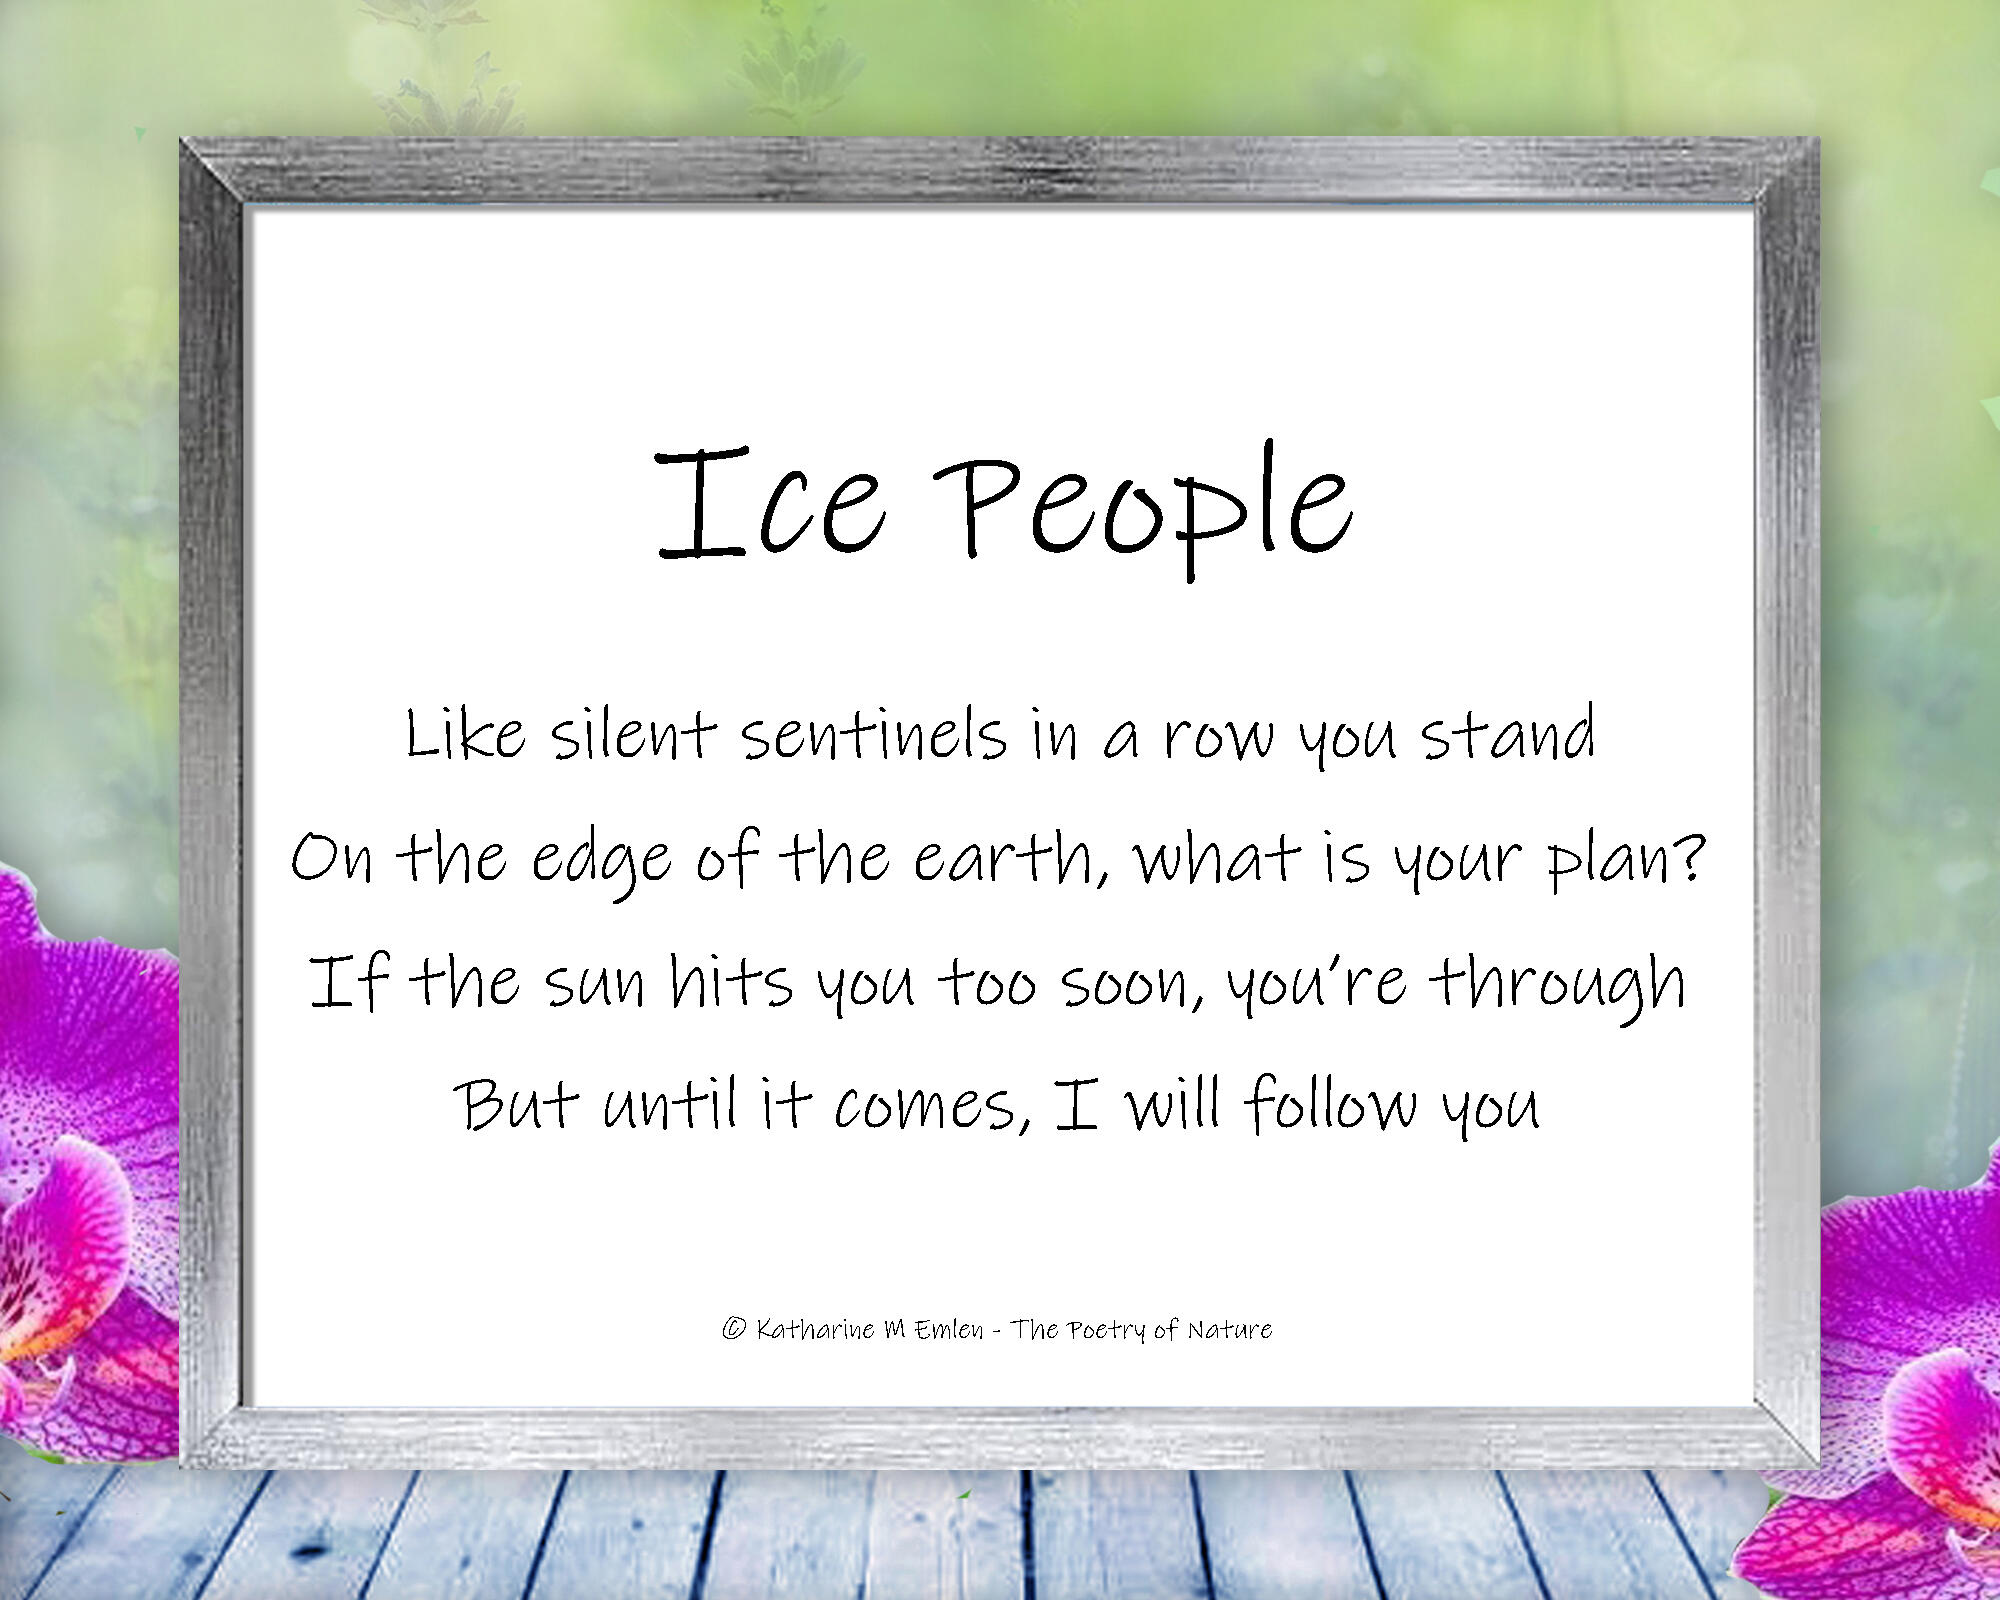 Poem for Ice People - Crystals of ice greet the day in this imaginative, intriguing, Nature Spirit Story. Photo with Poem - Ice People by The Poetry of Nature